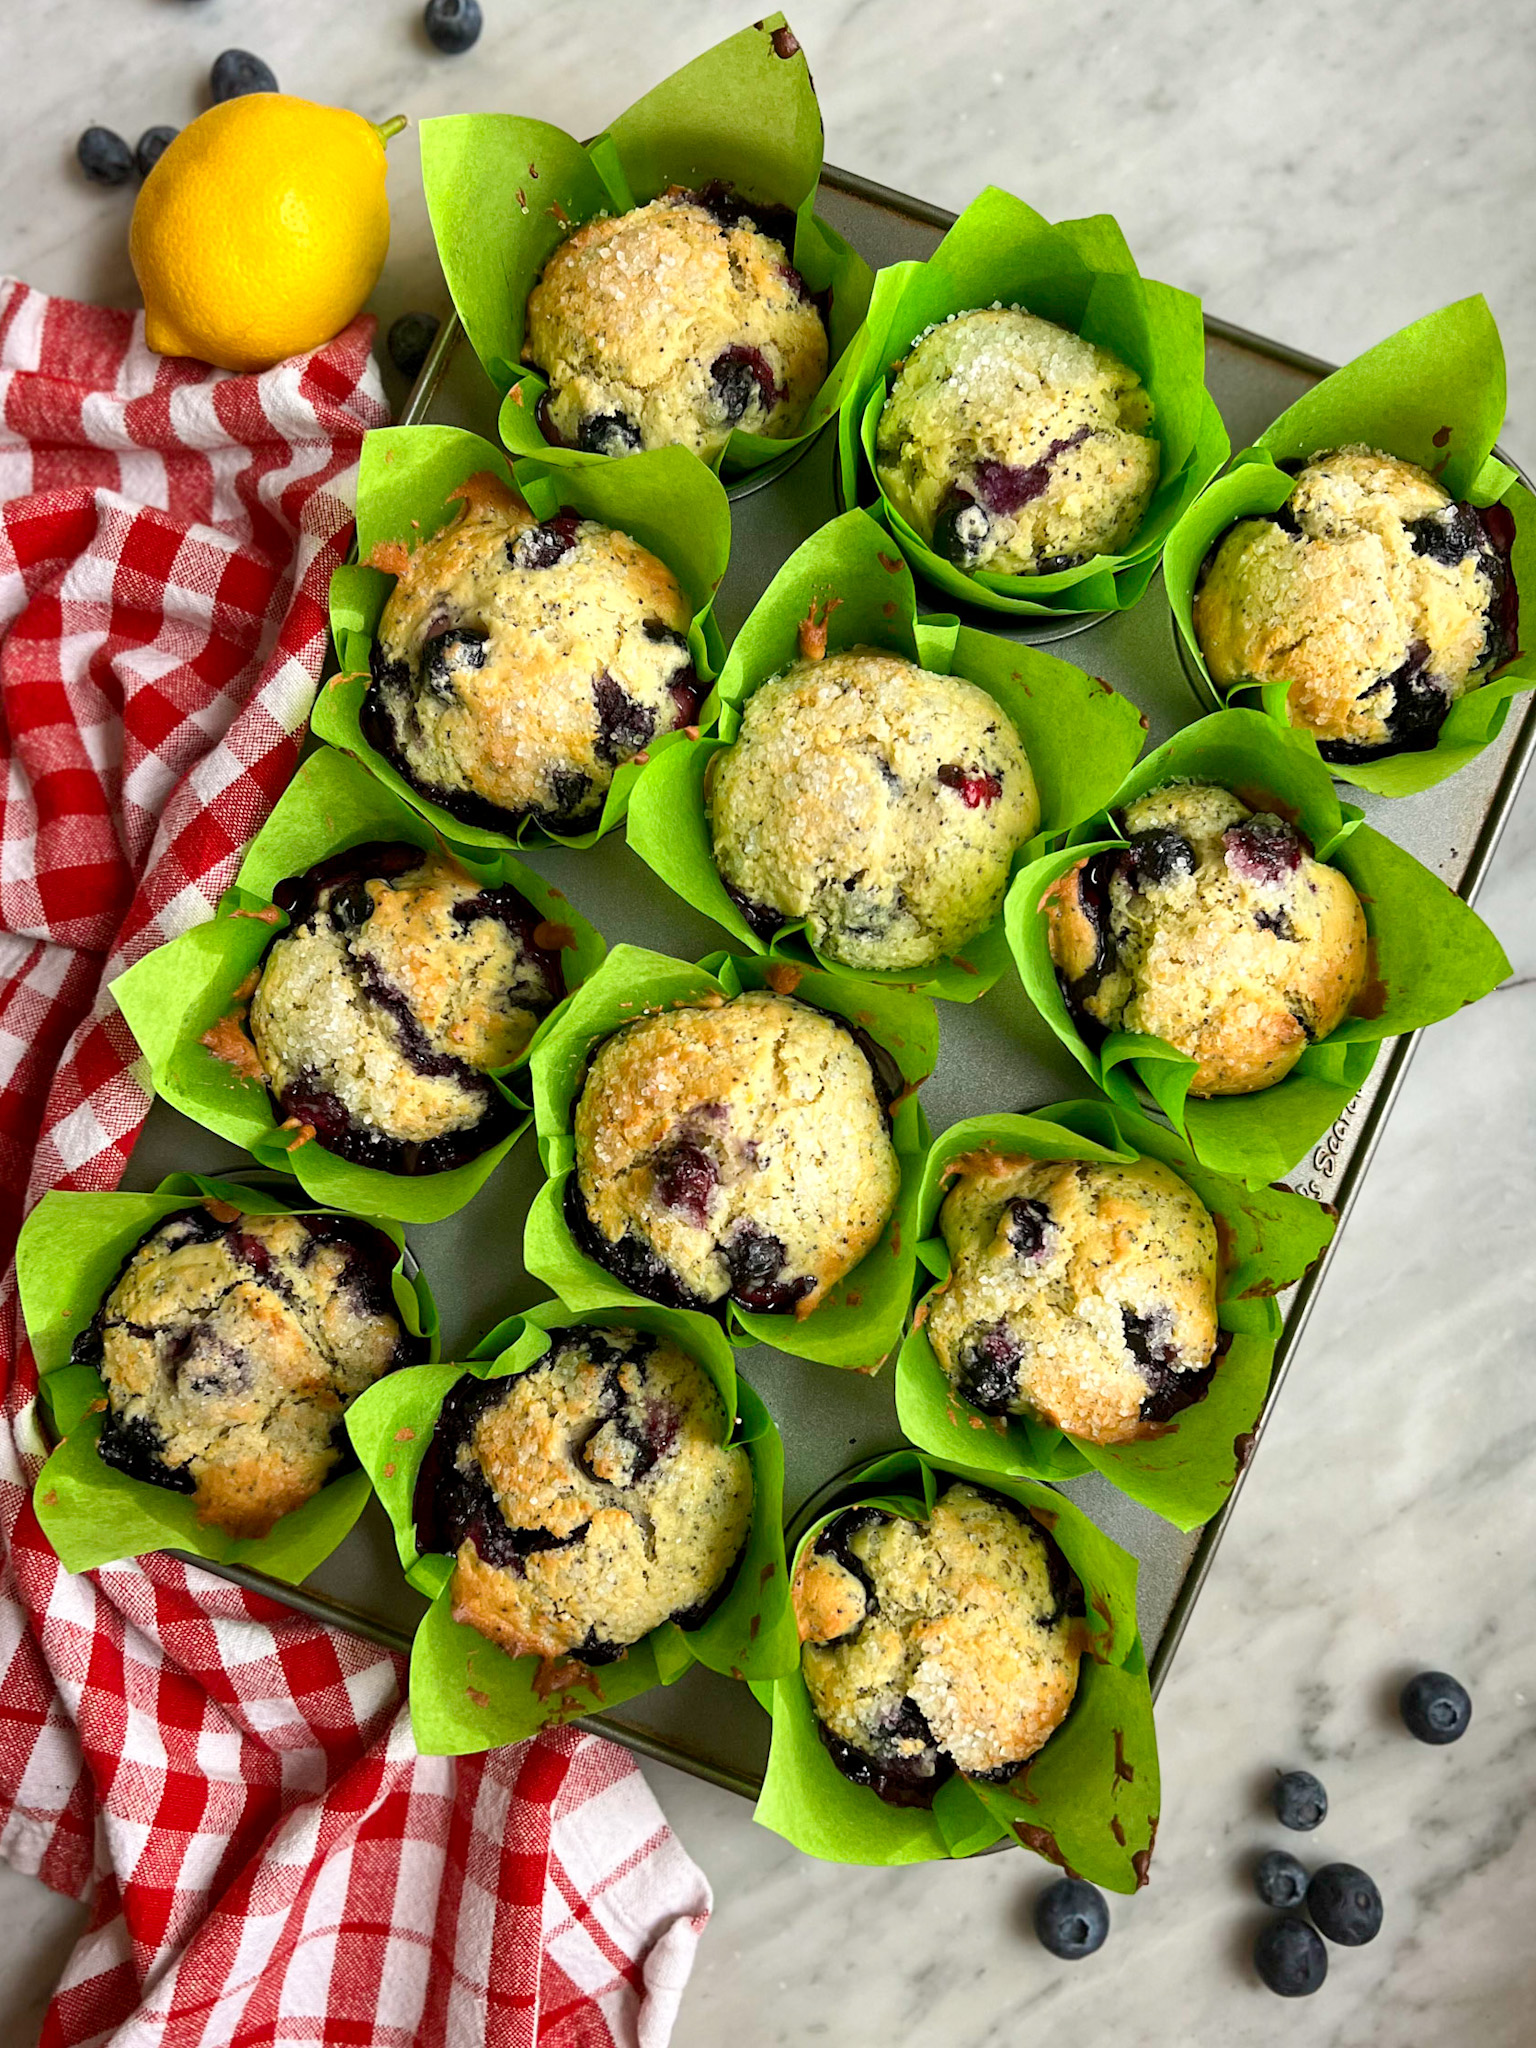 freshly baked lemon blueberry muffins with a red and white towel and a lemon and blueberries